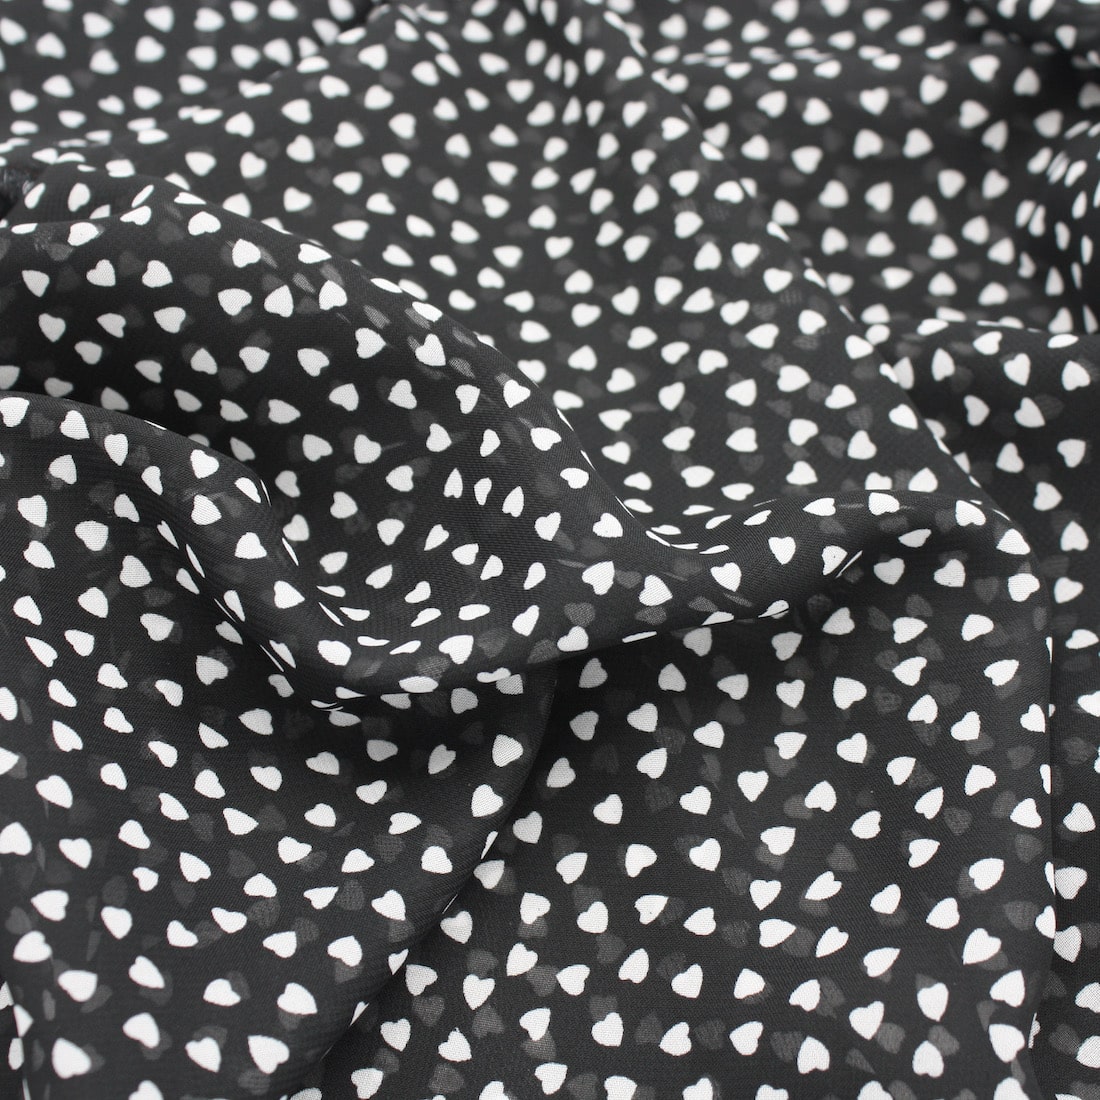 Chiffon fabric with small white hearts on black background